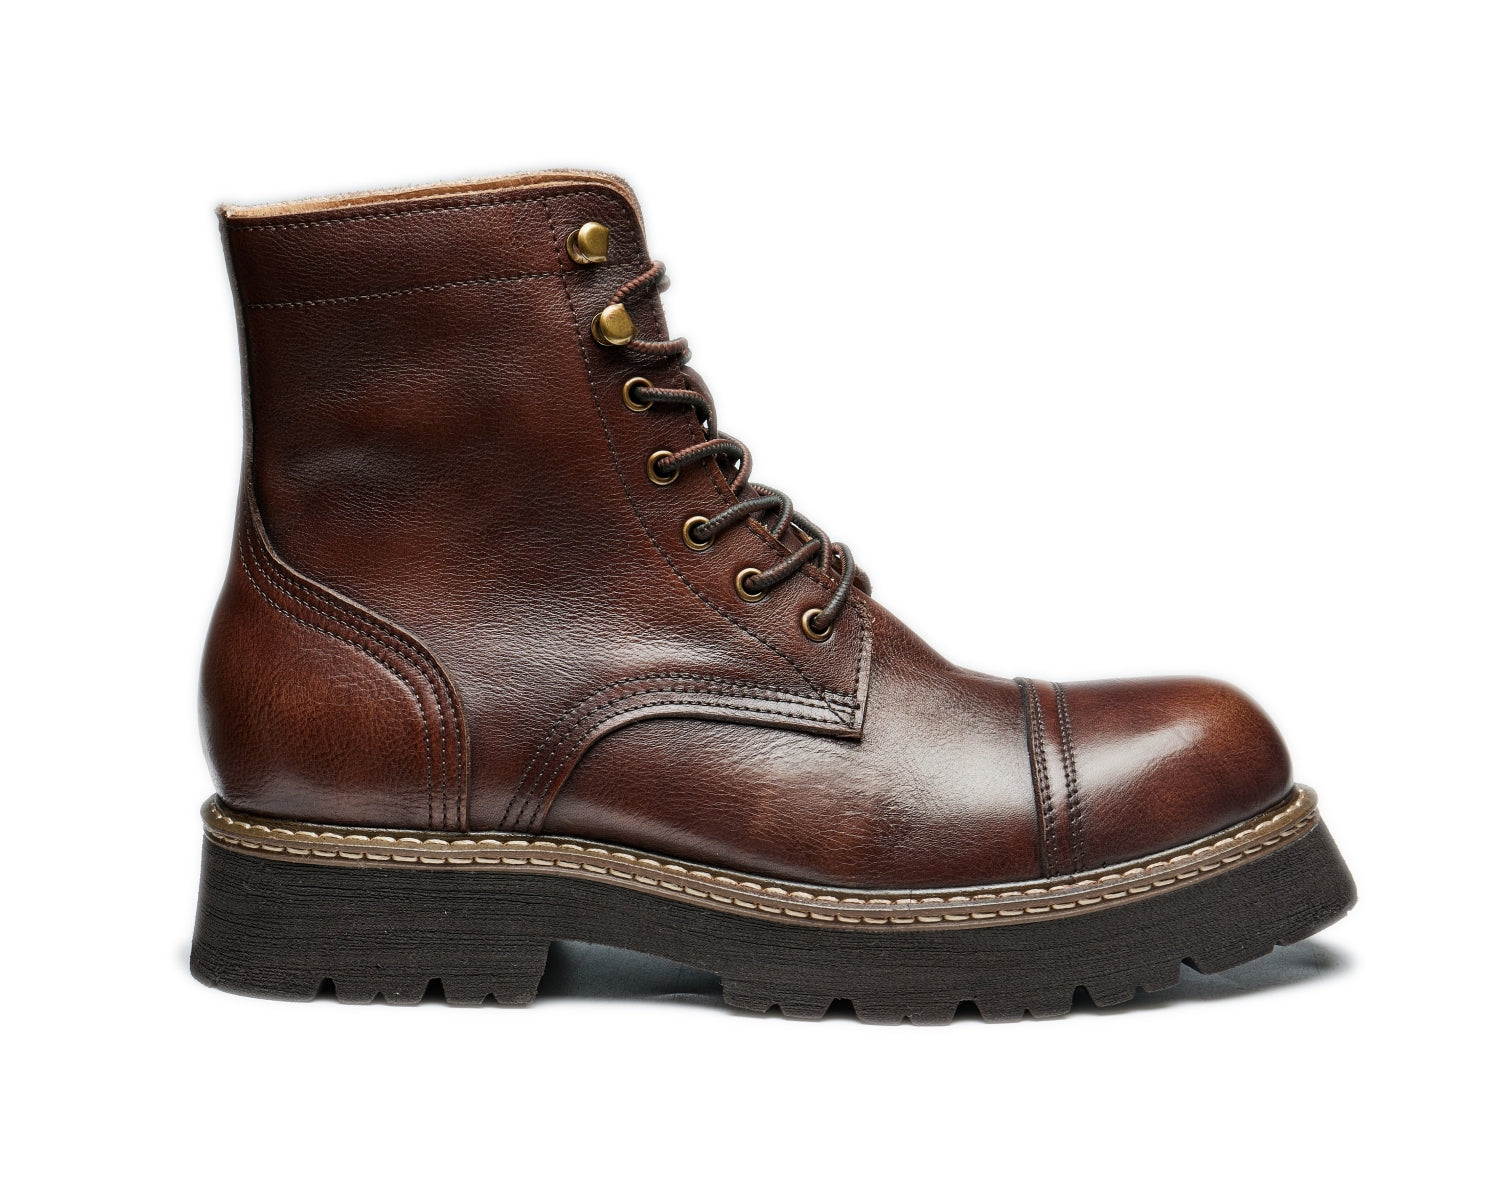 Men's lace-up cap toe work boots with lug sole in various styles including old and skin boots10